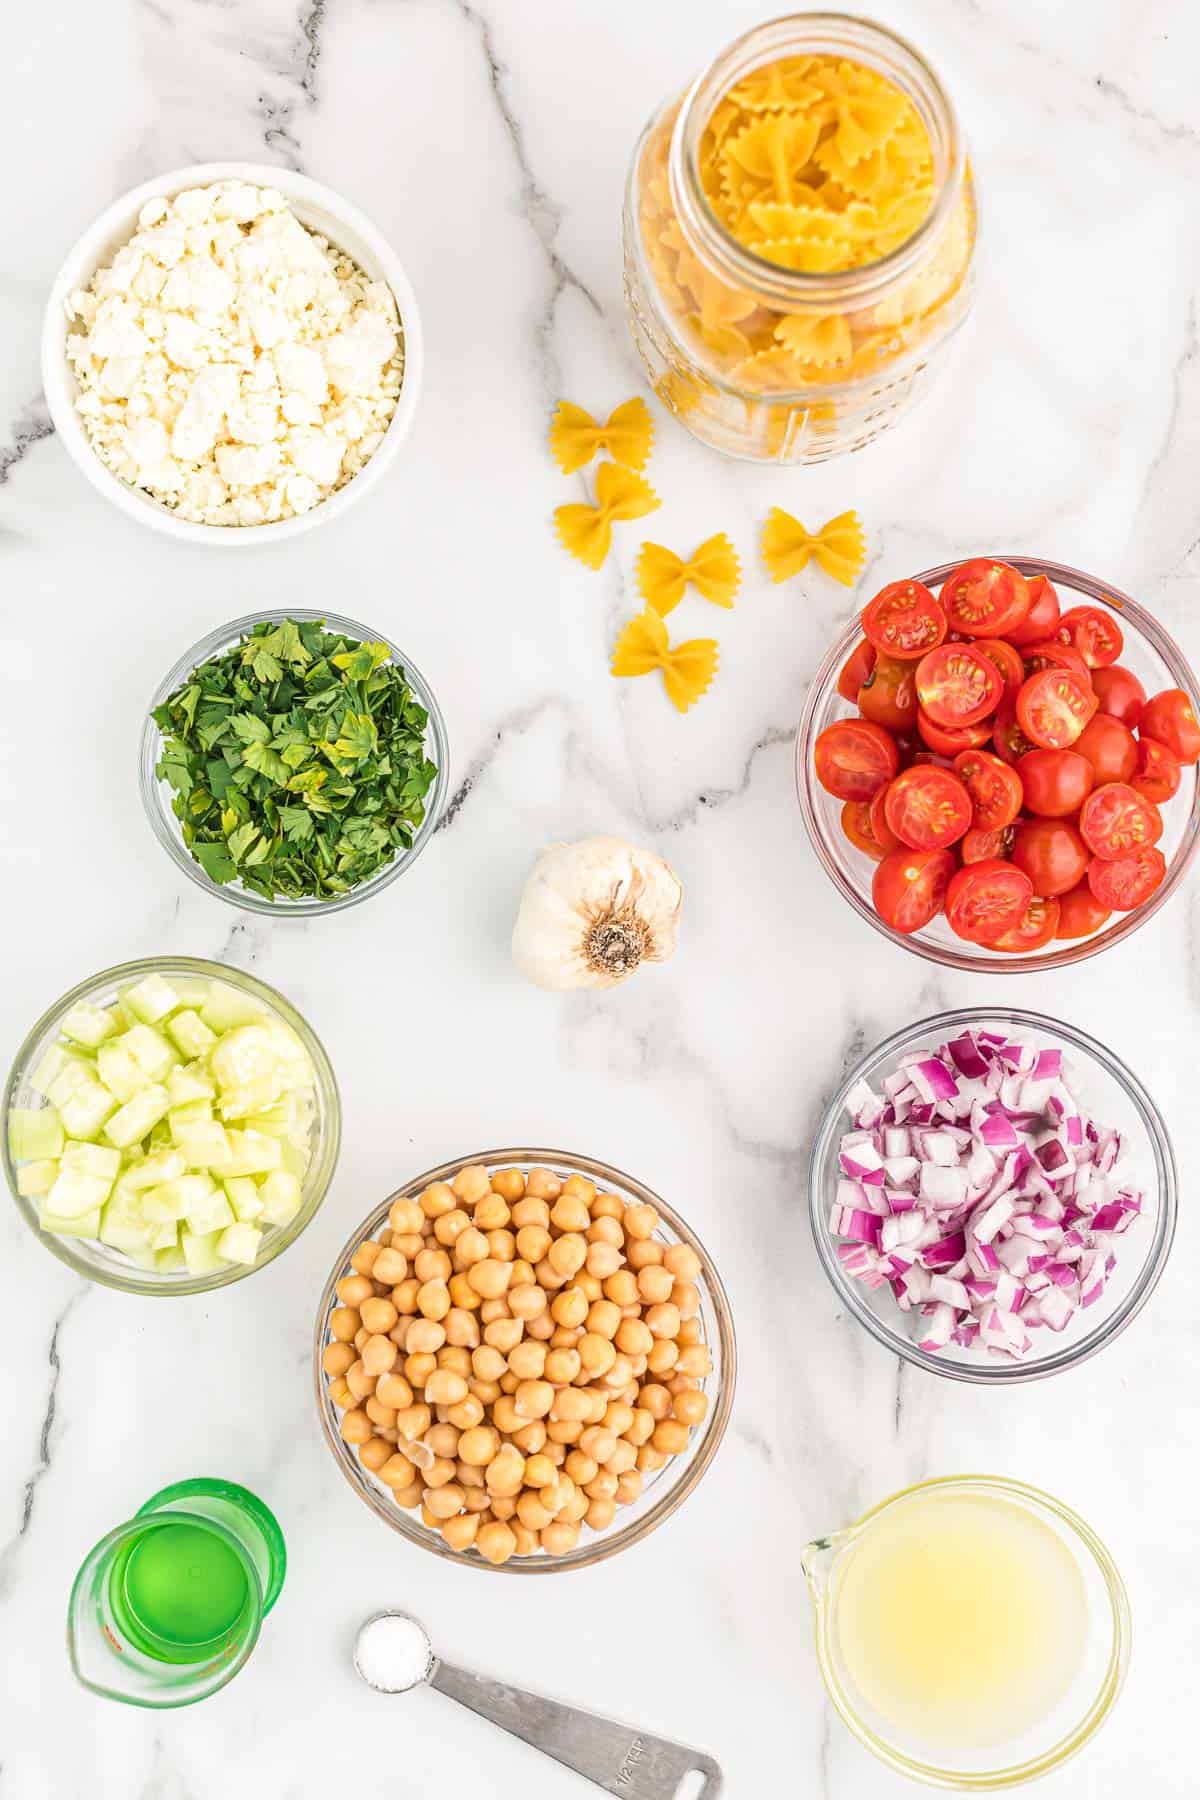 ingredients needed to make chickpea pasta salad